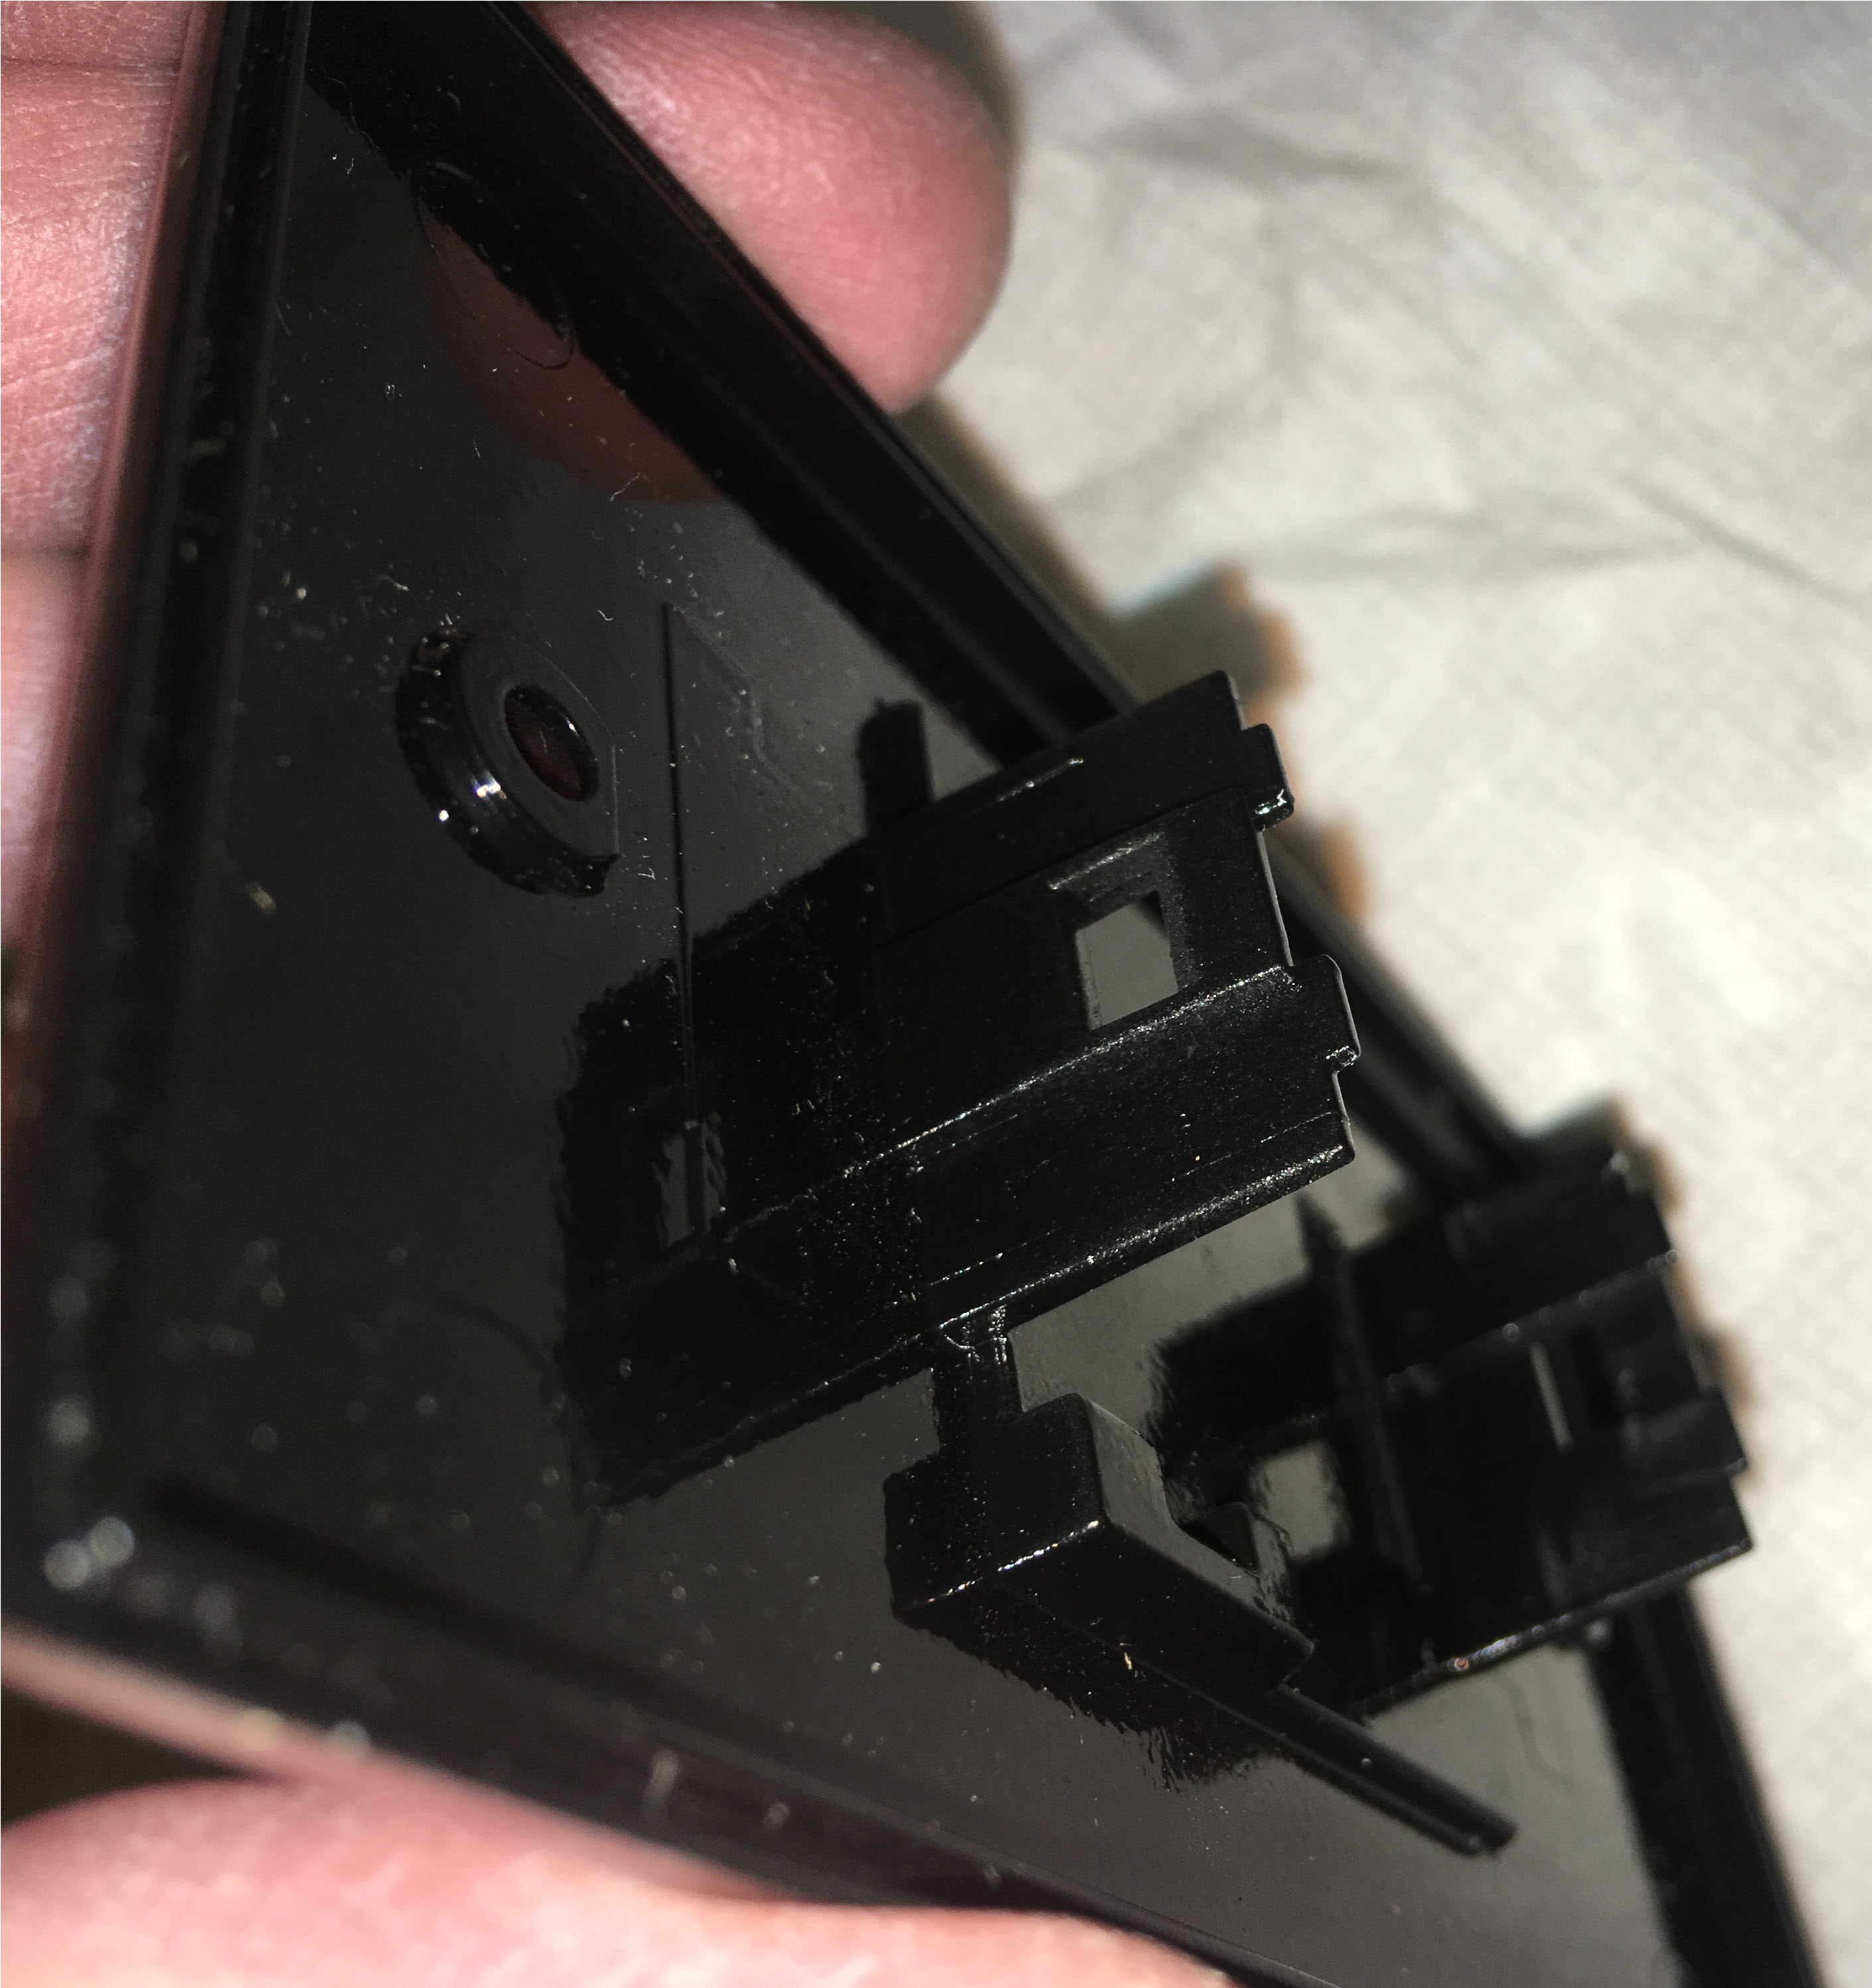 Wall plate clip detail for sensor mount.